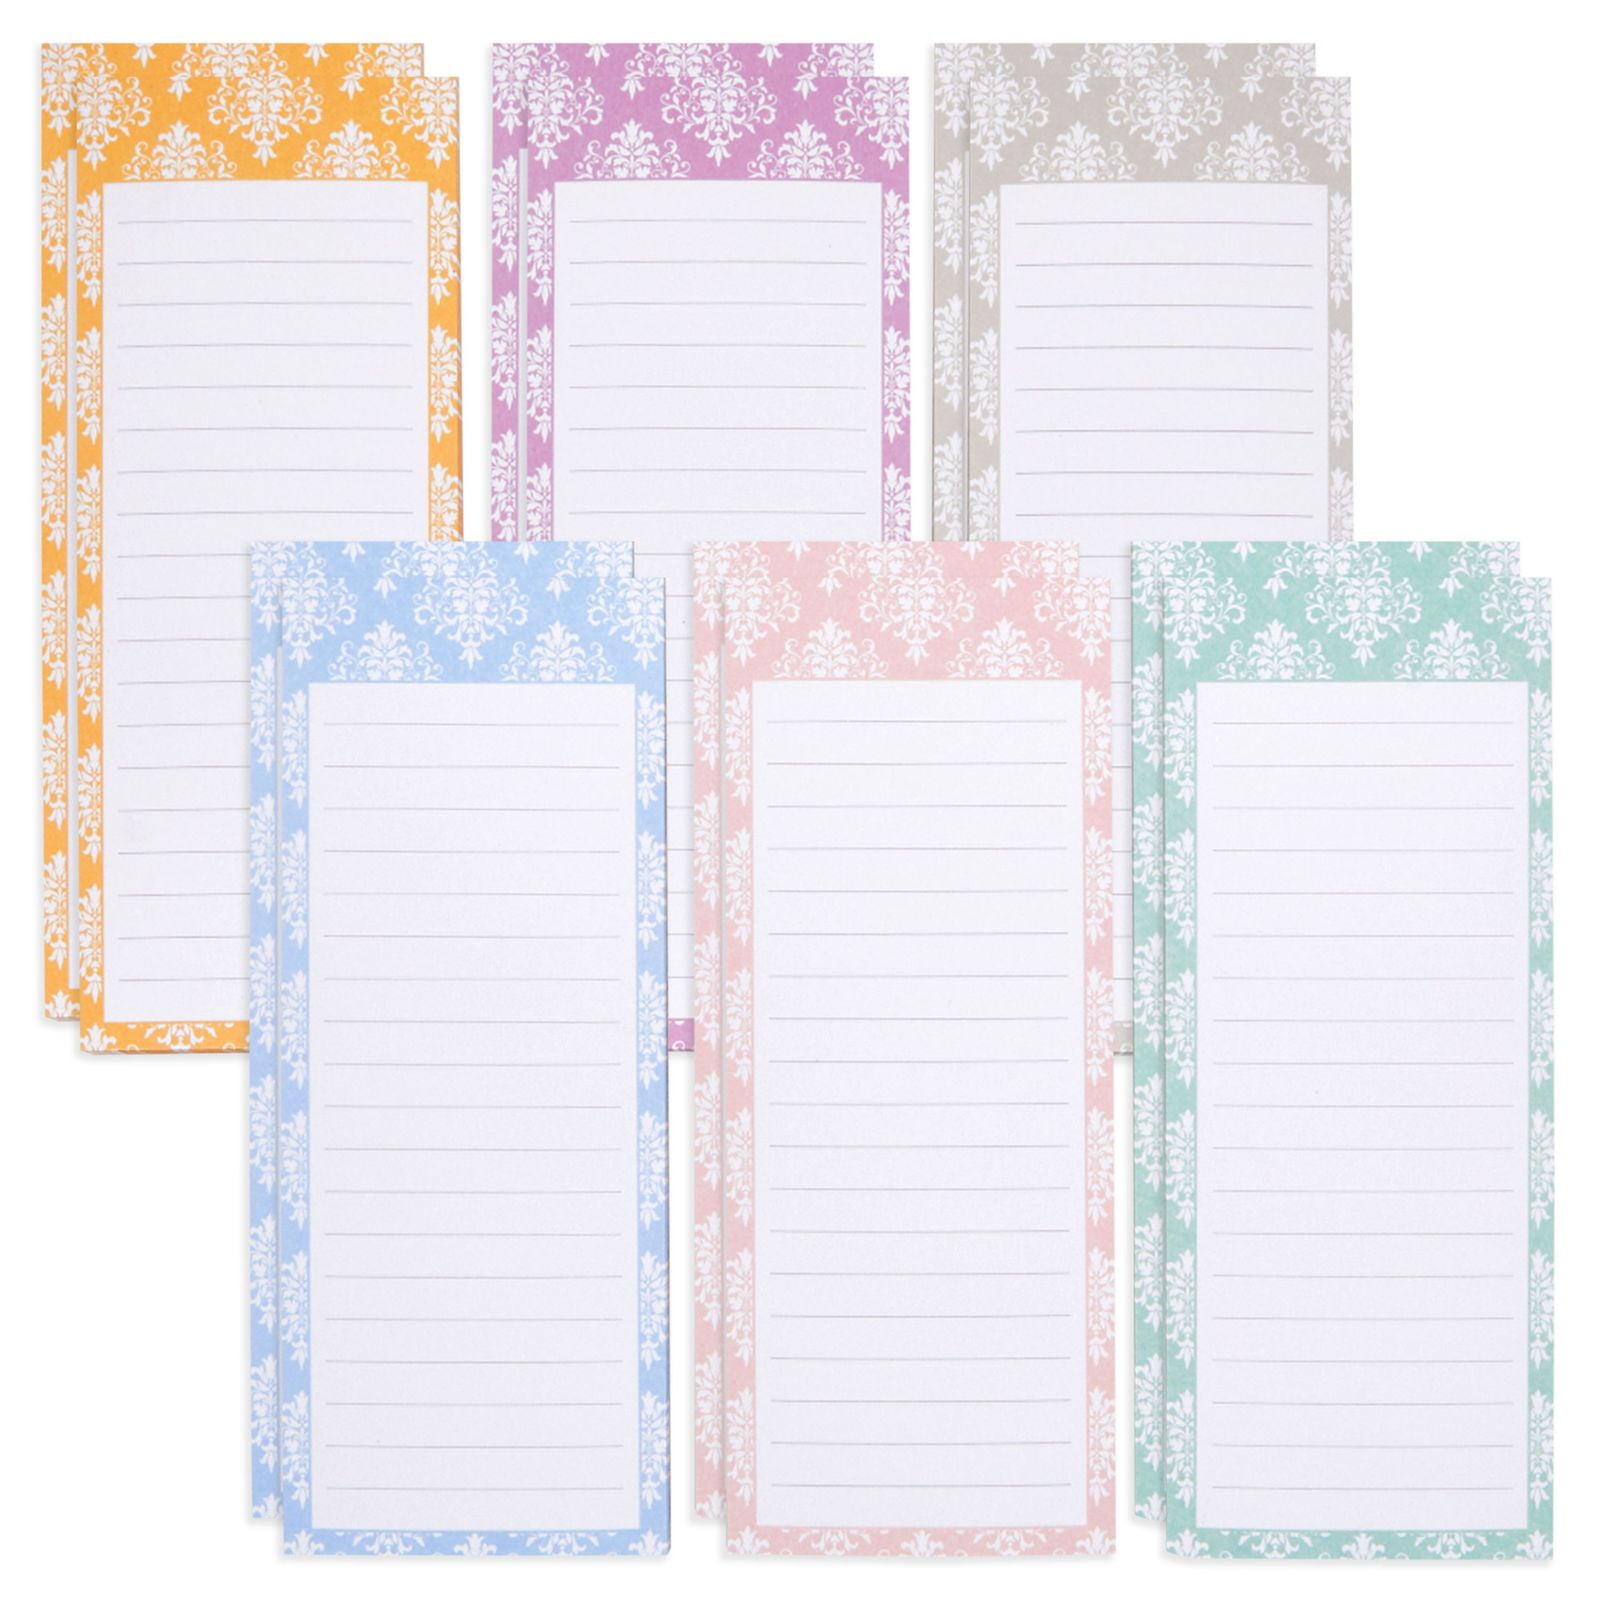 Shopping and to Do Lists with Checkbox,Note Pad for Refrigerator 3.3 x 3.8,50 Sheets 5 Pack Sports Learn Theme Magnetic Notepads with Pen Holder,for Grocery